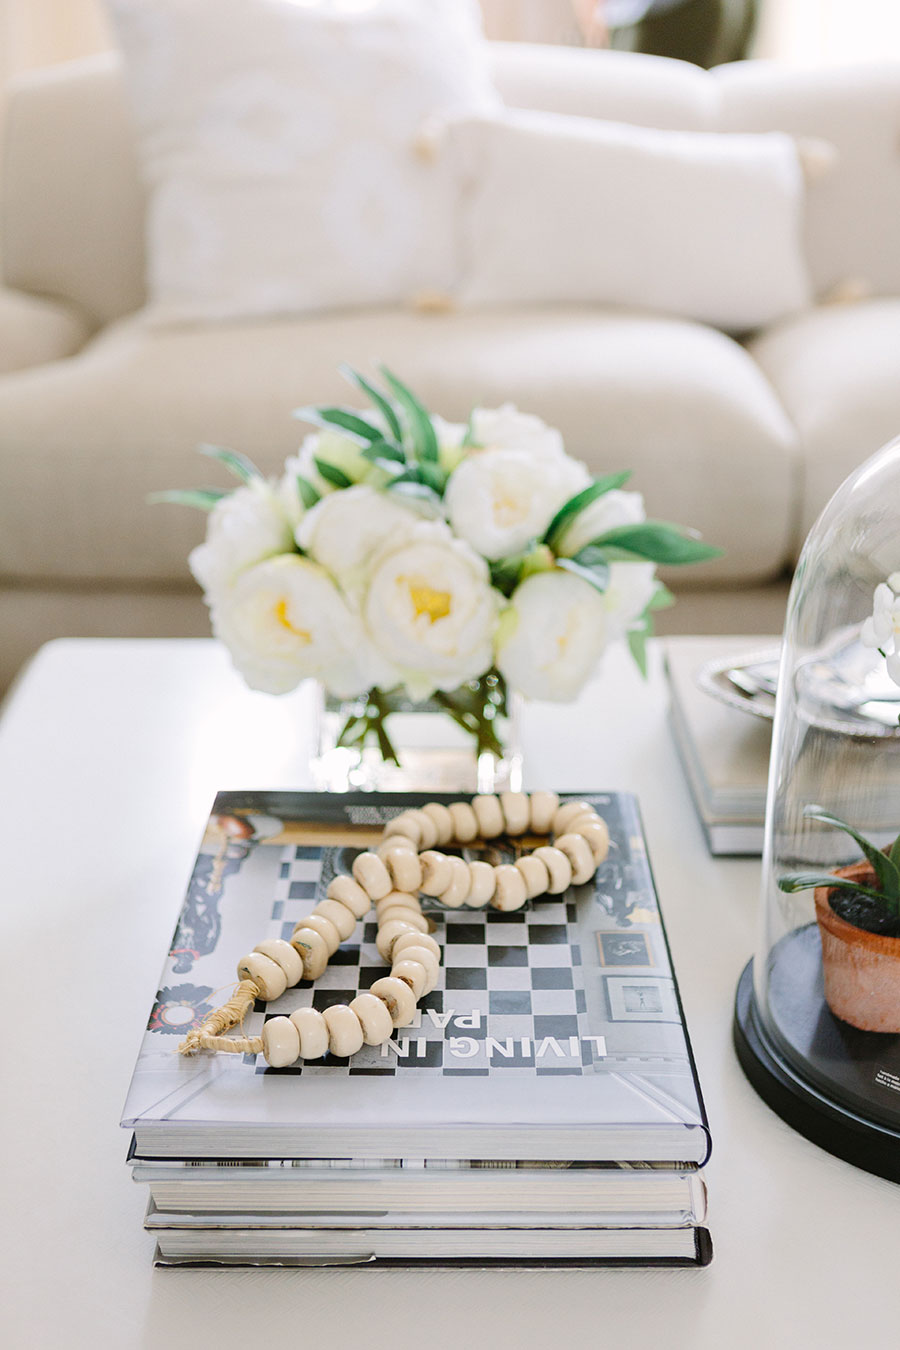 Pretty Coffee Table Books for Styling